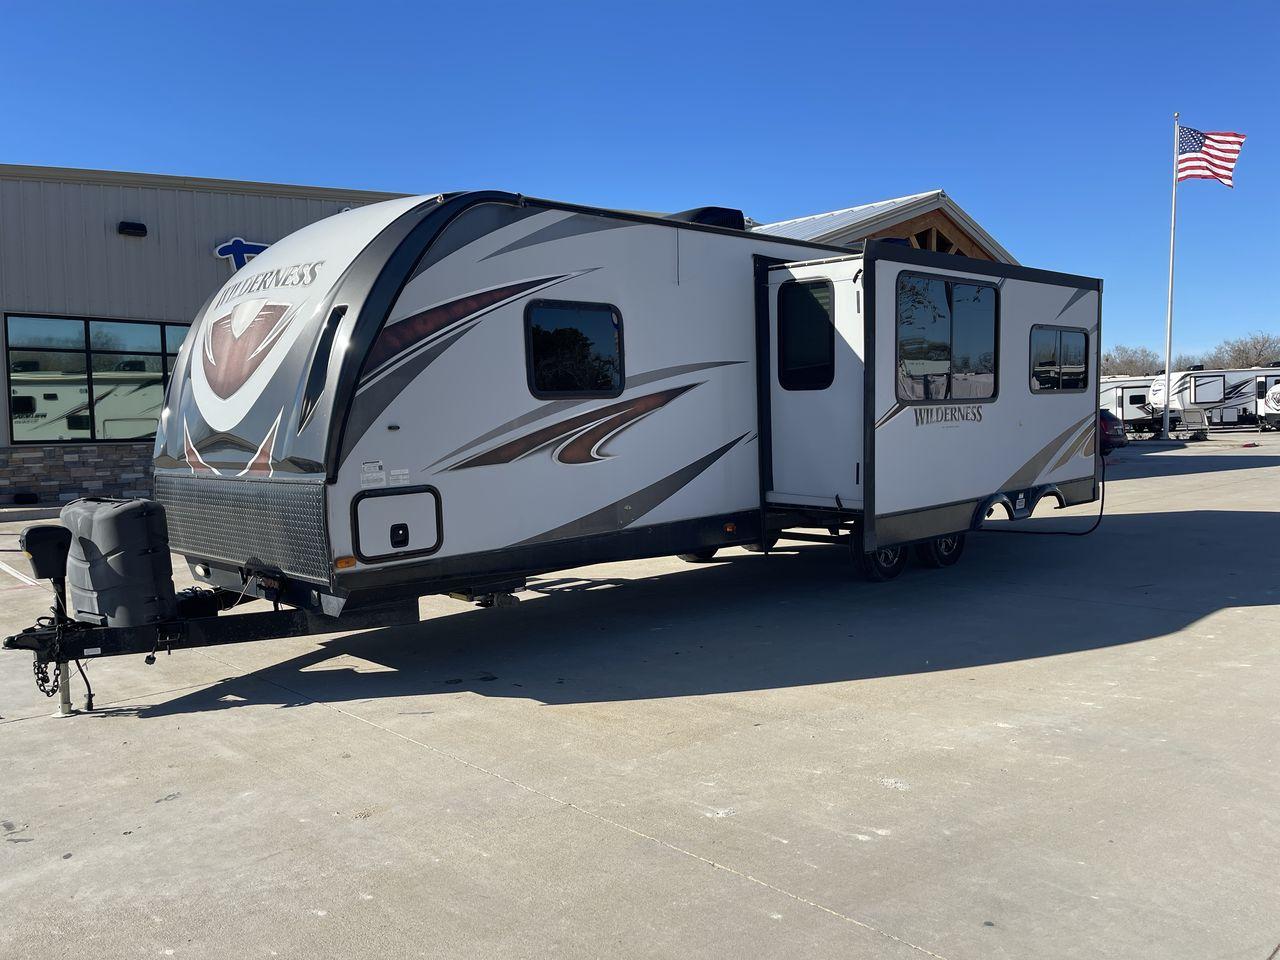 2018 GRAY HEARTLAND WILDERNESS USED 3125 (5SFNB3526JE) , Length: 35.75 ft. | Dry Weight: 6,840 lbs. | Gross Weight: 8,600 lbs. | Slides: 1 transmission, located at 4319 N Main Street, Cleburne, TX, 76033, (817) 221-0660, 32.435829, -97.384178 - Discover your inner adventurer with the Heartland Wilderness 3125 travel trailer from 2018. This RV offers the ideal balance of roomy living, contemporary conveniences, and tough sturdiness for your outdoor adventures. It is designed for individuals who desire both comfort and exploration. The dimen - Photo #23